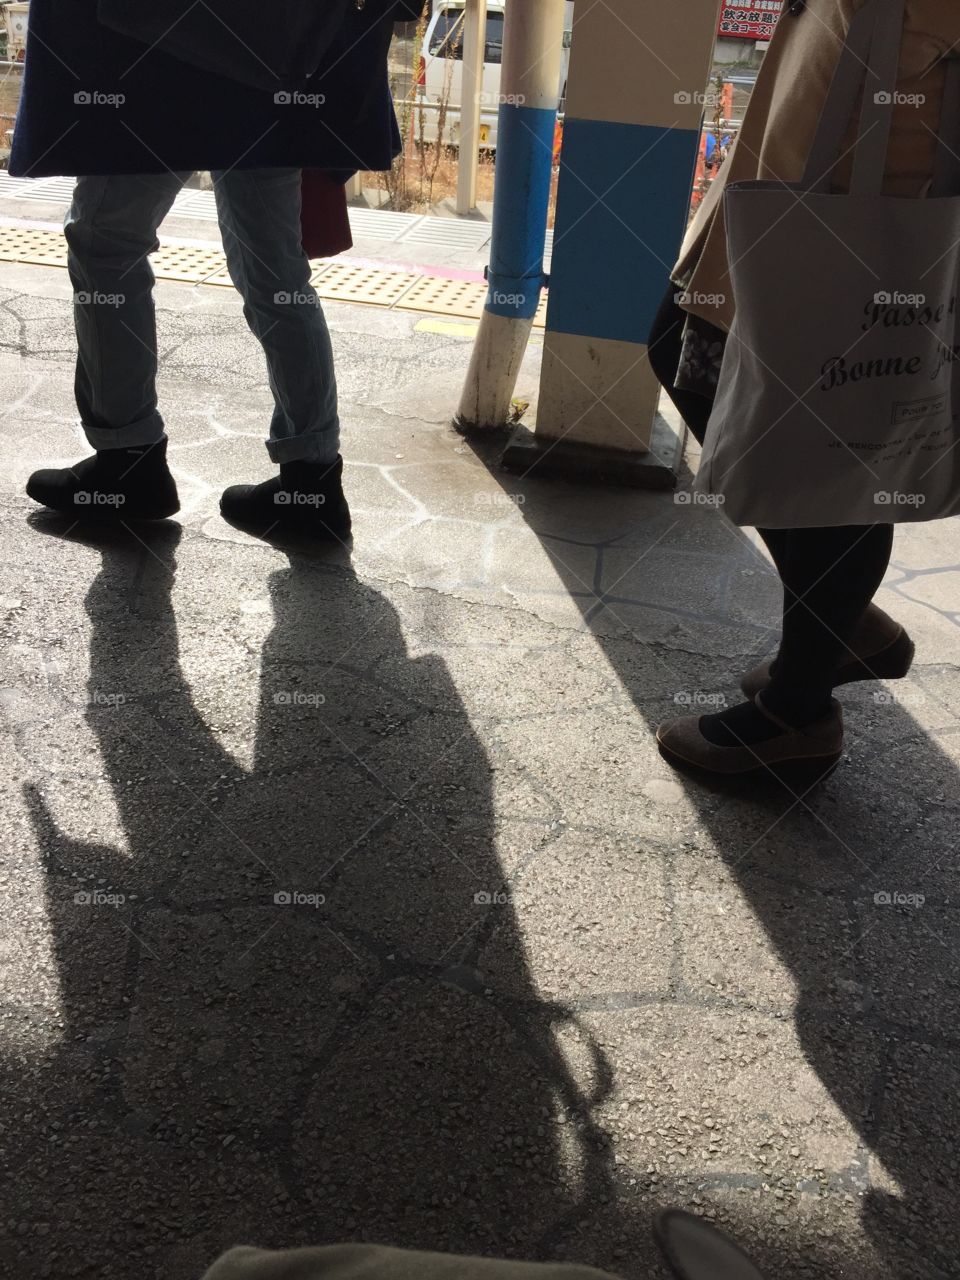 Shadows of people passing by in a train station platform in Tokyo Japan
